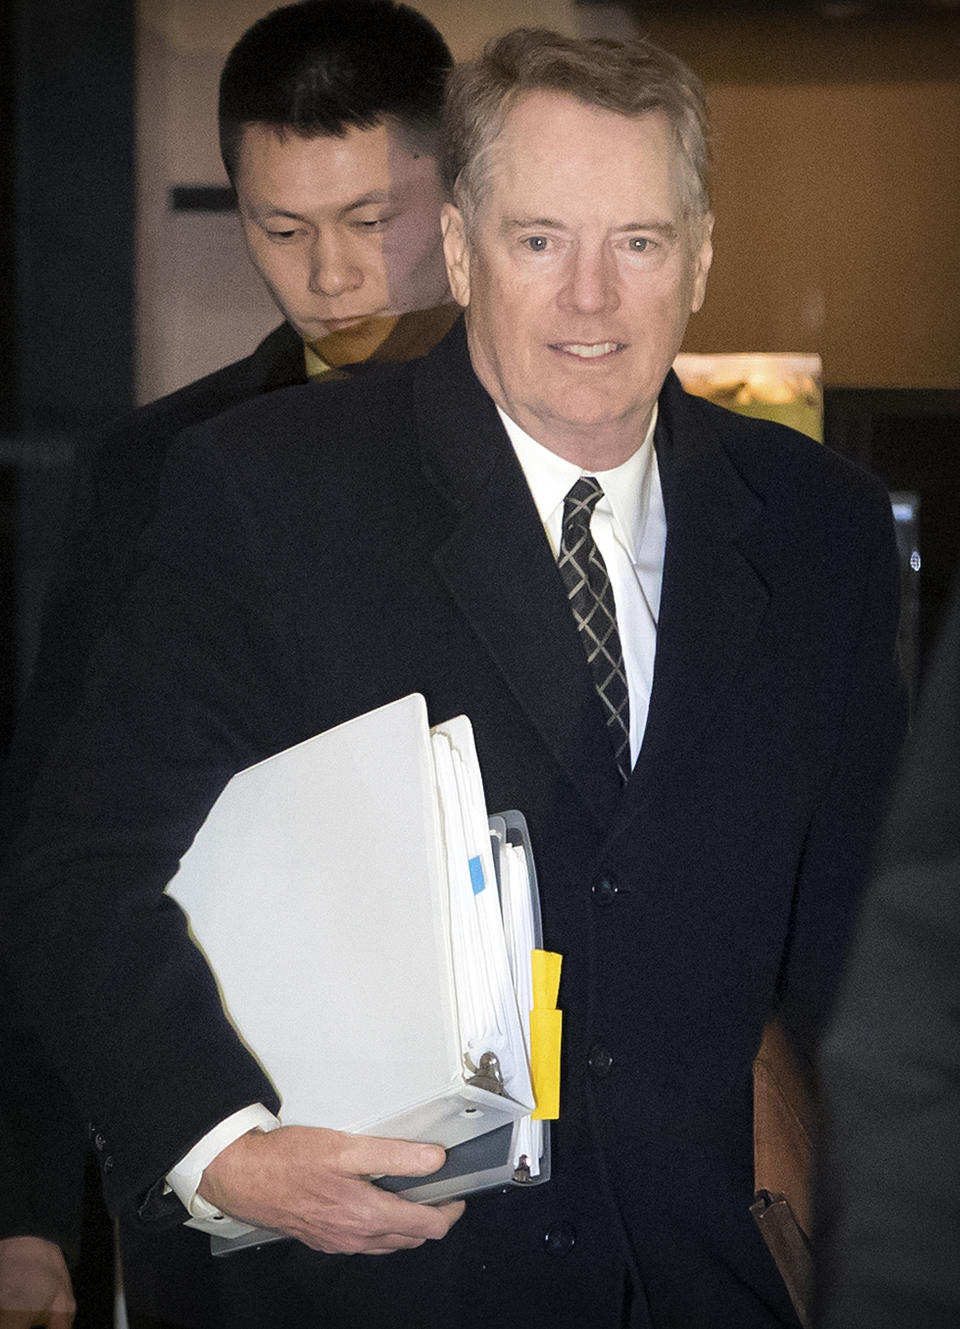 U.S. Trade Representative Robert Lighthizer arrives at his hotel in Beijing, Wednesday, Feb. 13, 2019. U.S. Treasury Secretary Steven Mnuchin and Lighthizer arrived in China's capital on Tuesday to hold a new round of high-level trade talks with China on Feb. 14-15. (AP Photo/Mark Schiefelbein)